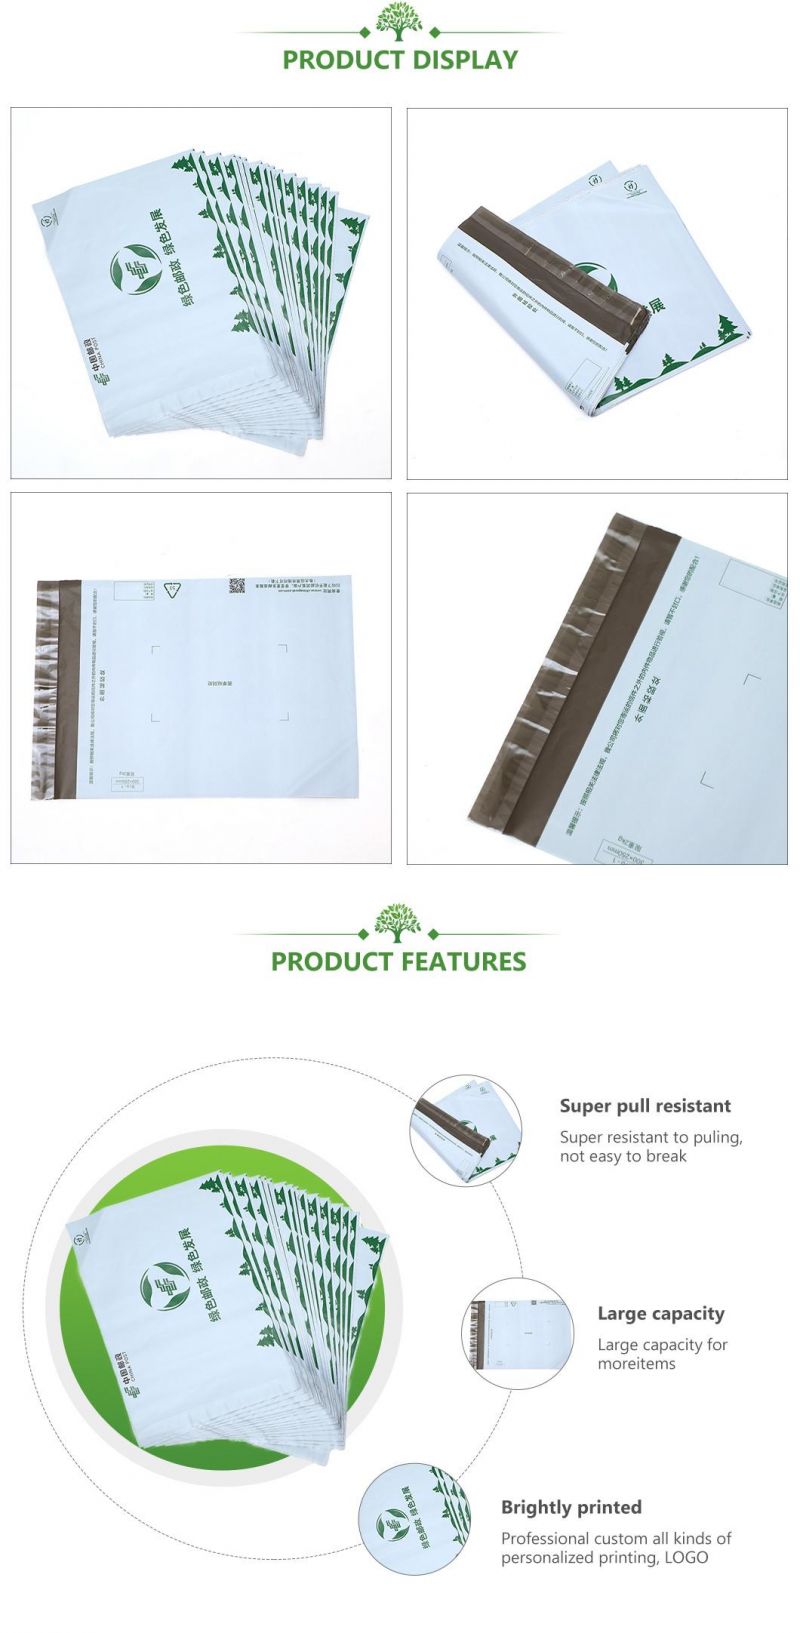 PLA+Pbat/Pbat+Corn Starch Made Biodegradable Bags Compostable Poly Mailer Bags Manufacturer with FDA, Brc, BSCI, CE, Grs, Bpi, Seeding Certificates